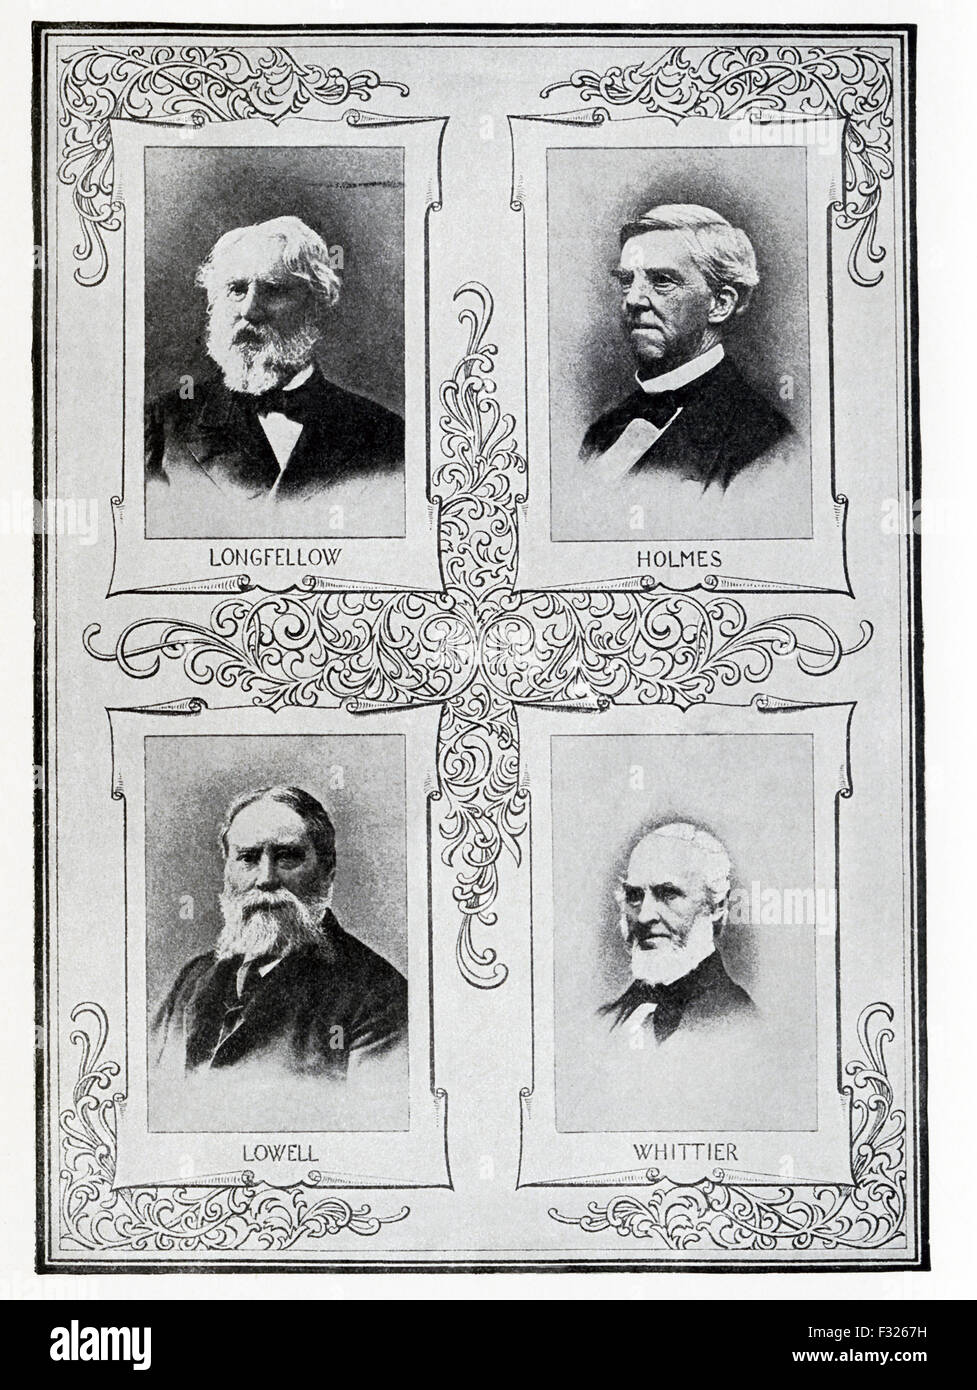 The American authors pictured here are from left to right, top to bottom: Henry Wadsworth Longfellow (1807-1882), Oliver Wendell Holmes (1809-1894), James Russell Lowell 1819-1891), John Greenleaf Whittier (1807-1892). Stock Photo